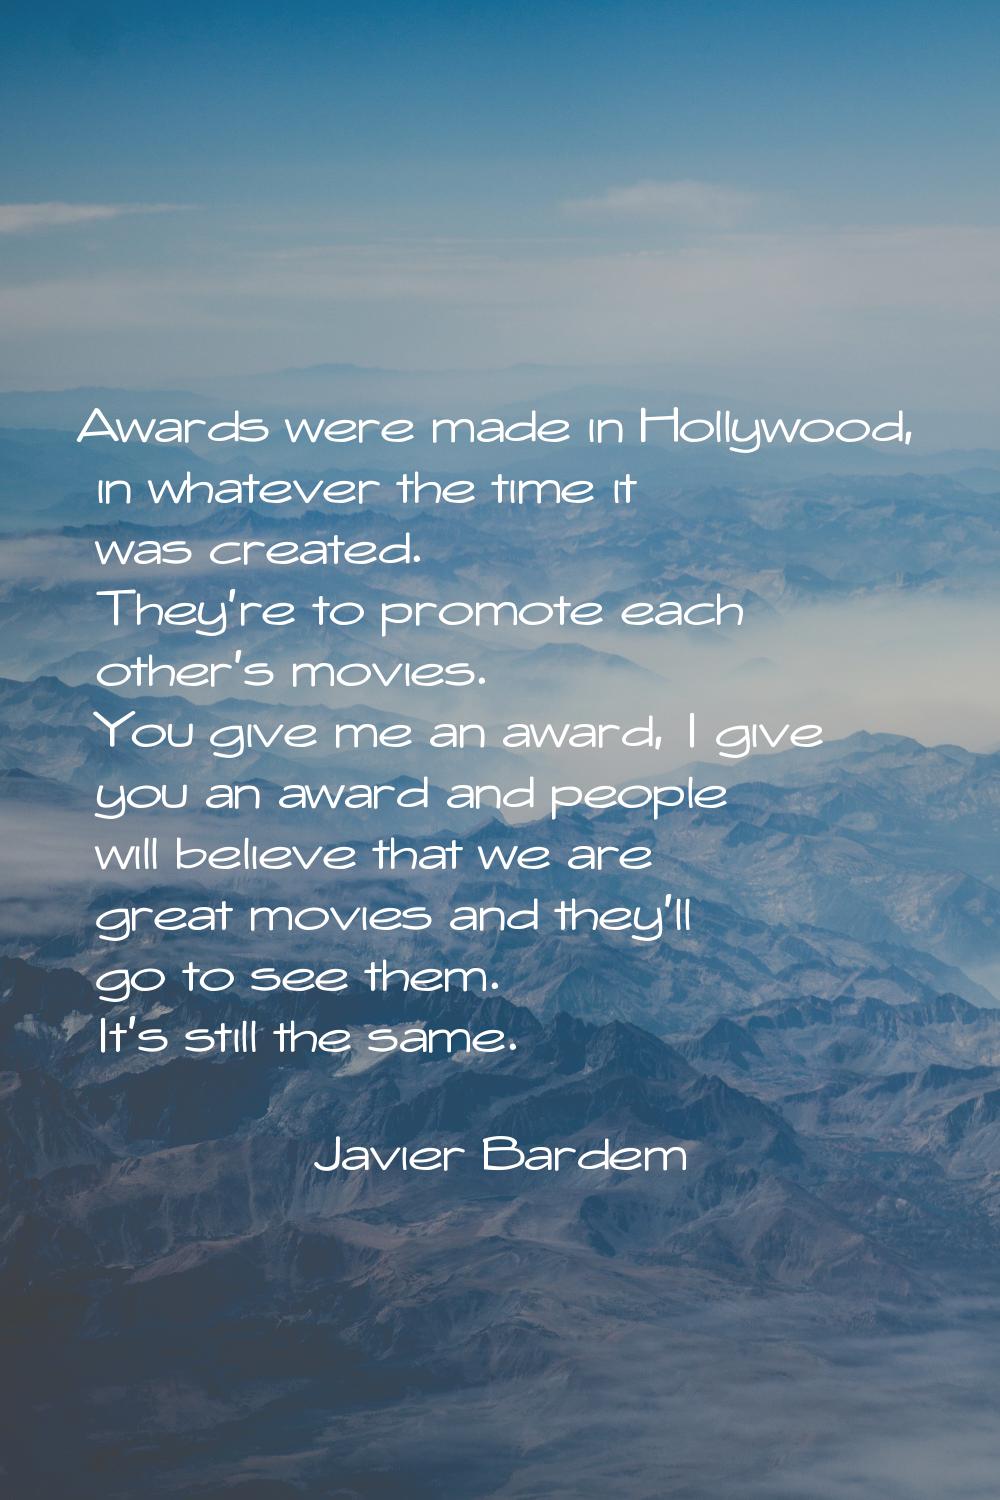 Awards were made in Hollywood, in whatever the time it was created. They're to promote each other's